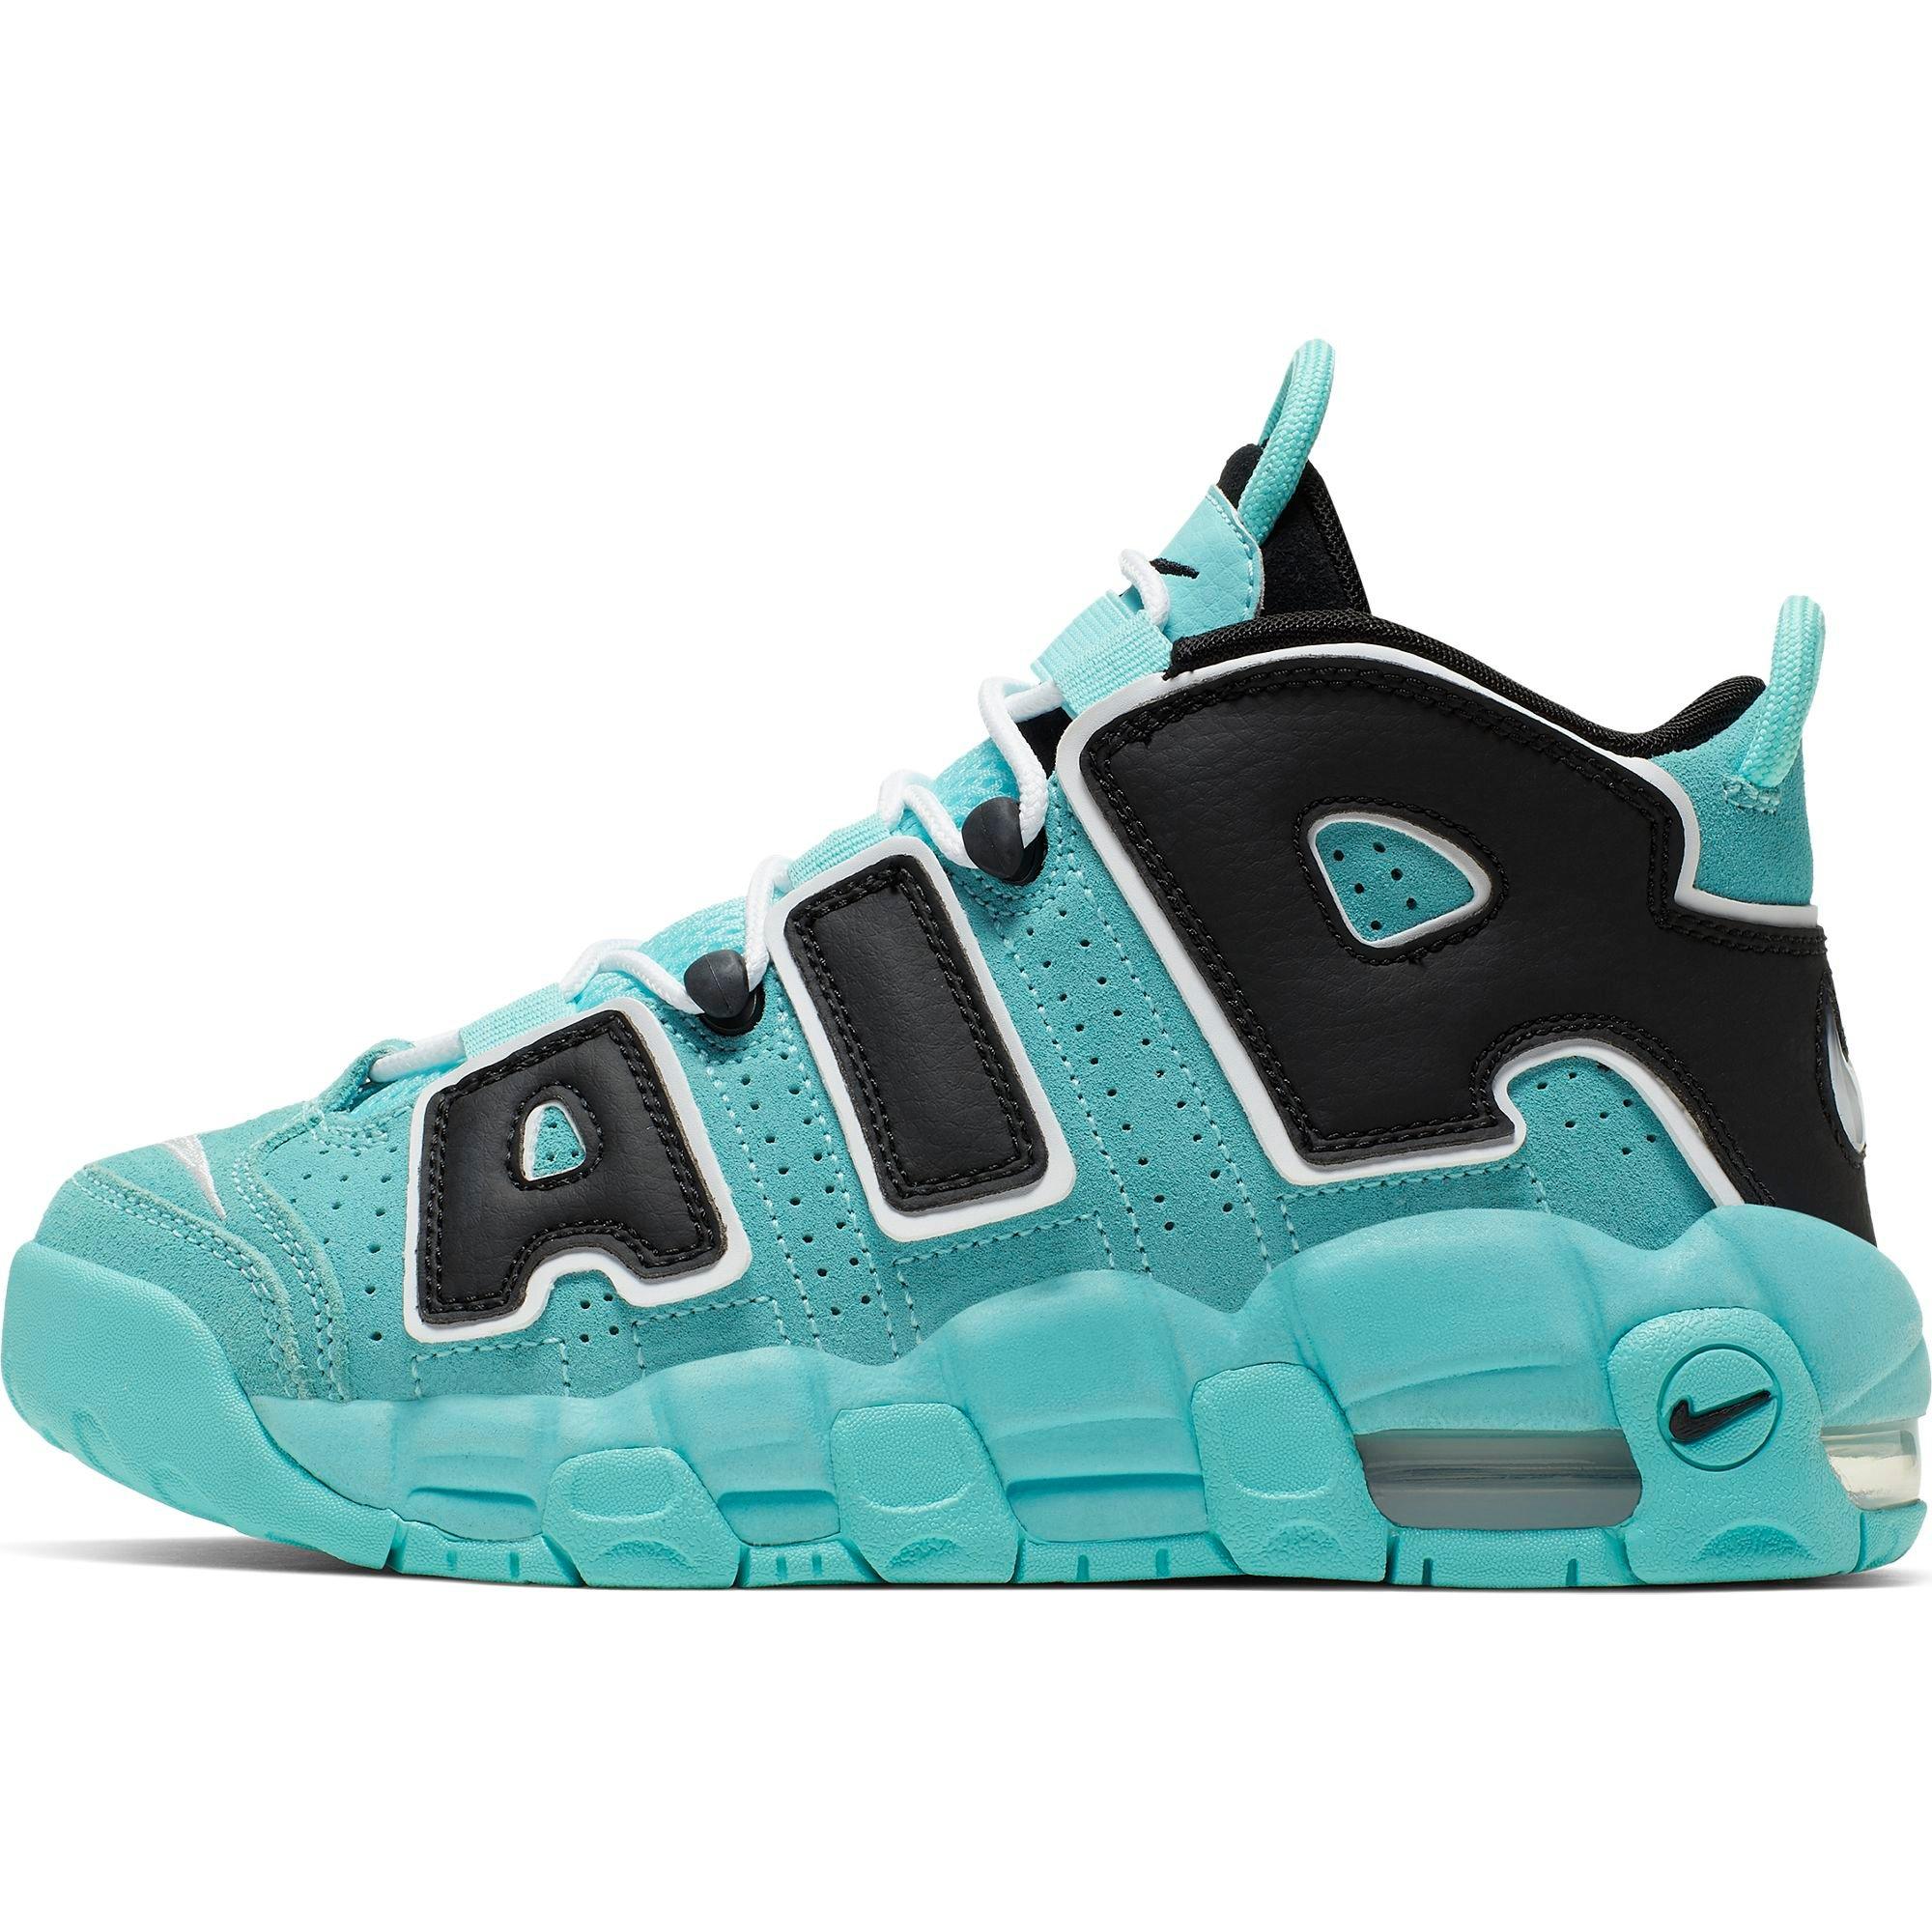 teal nike uptempo